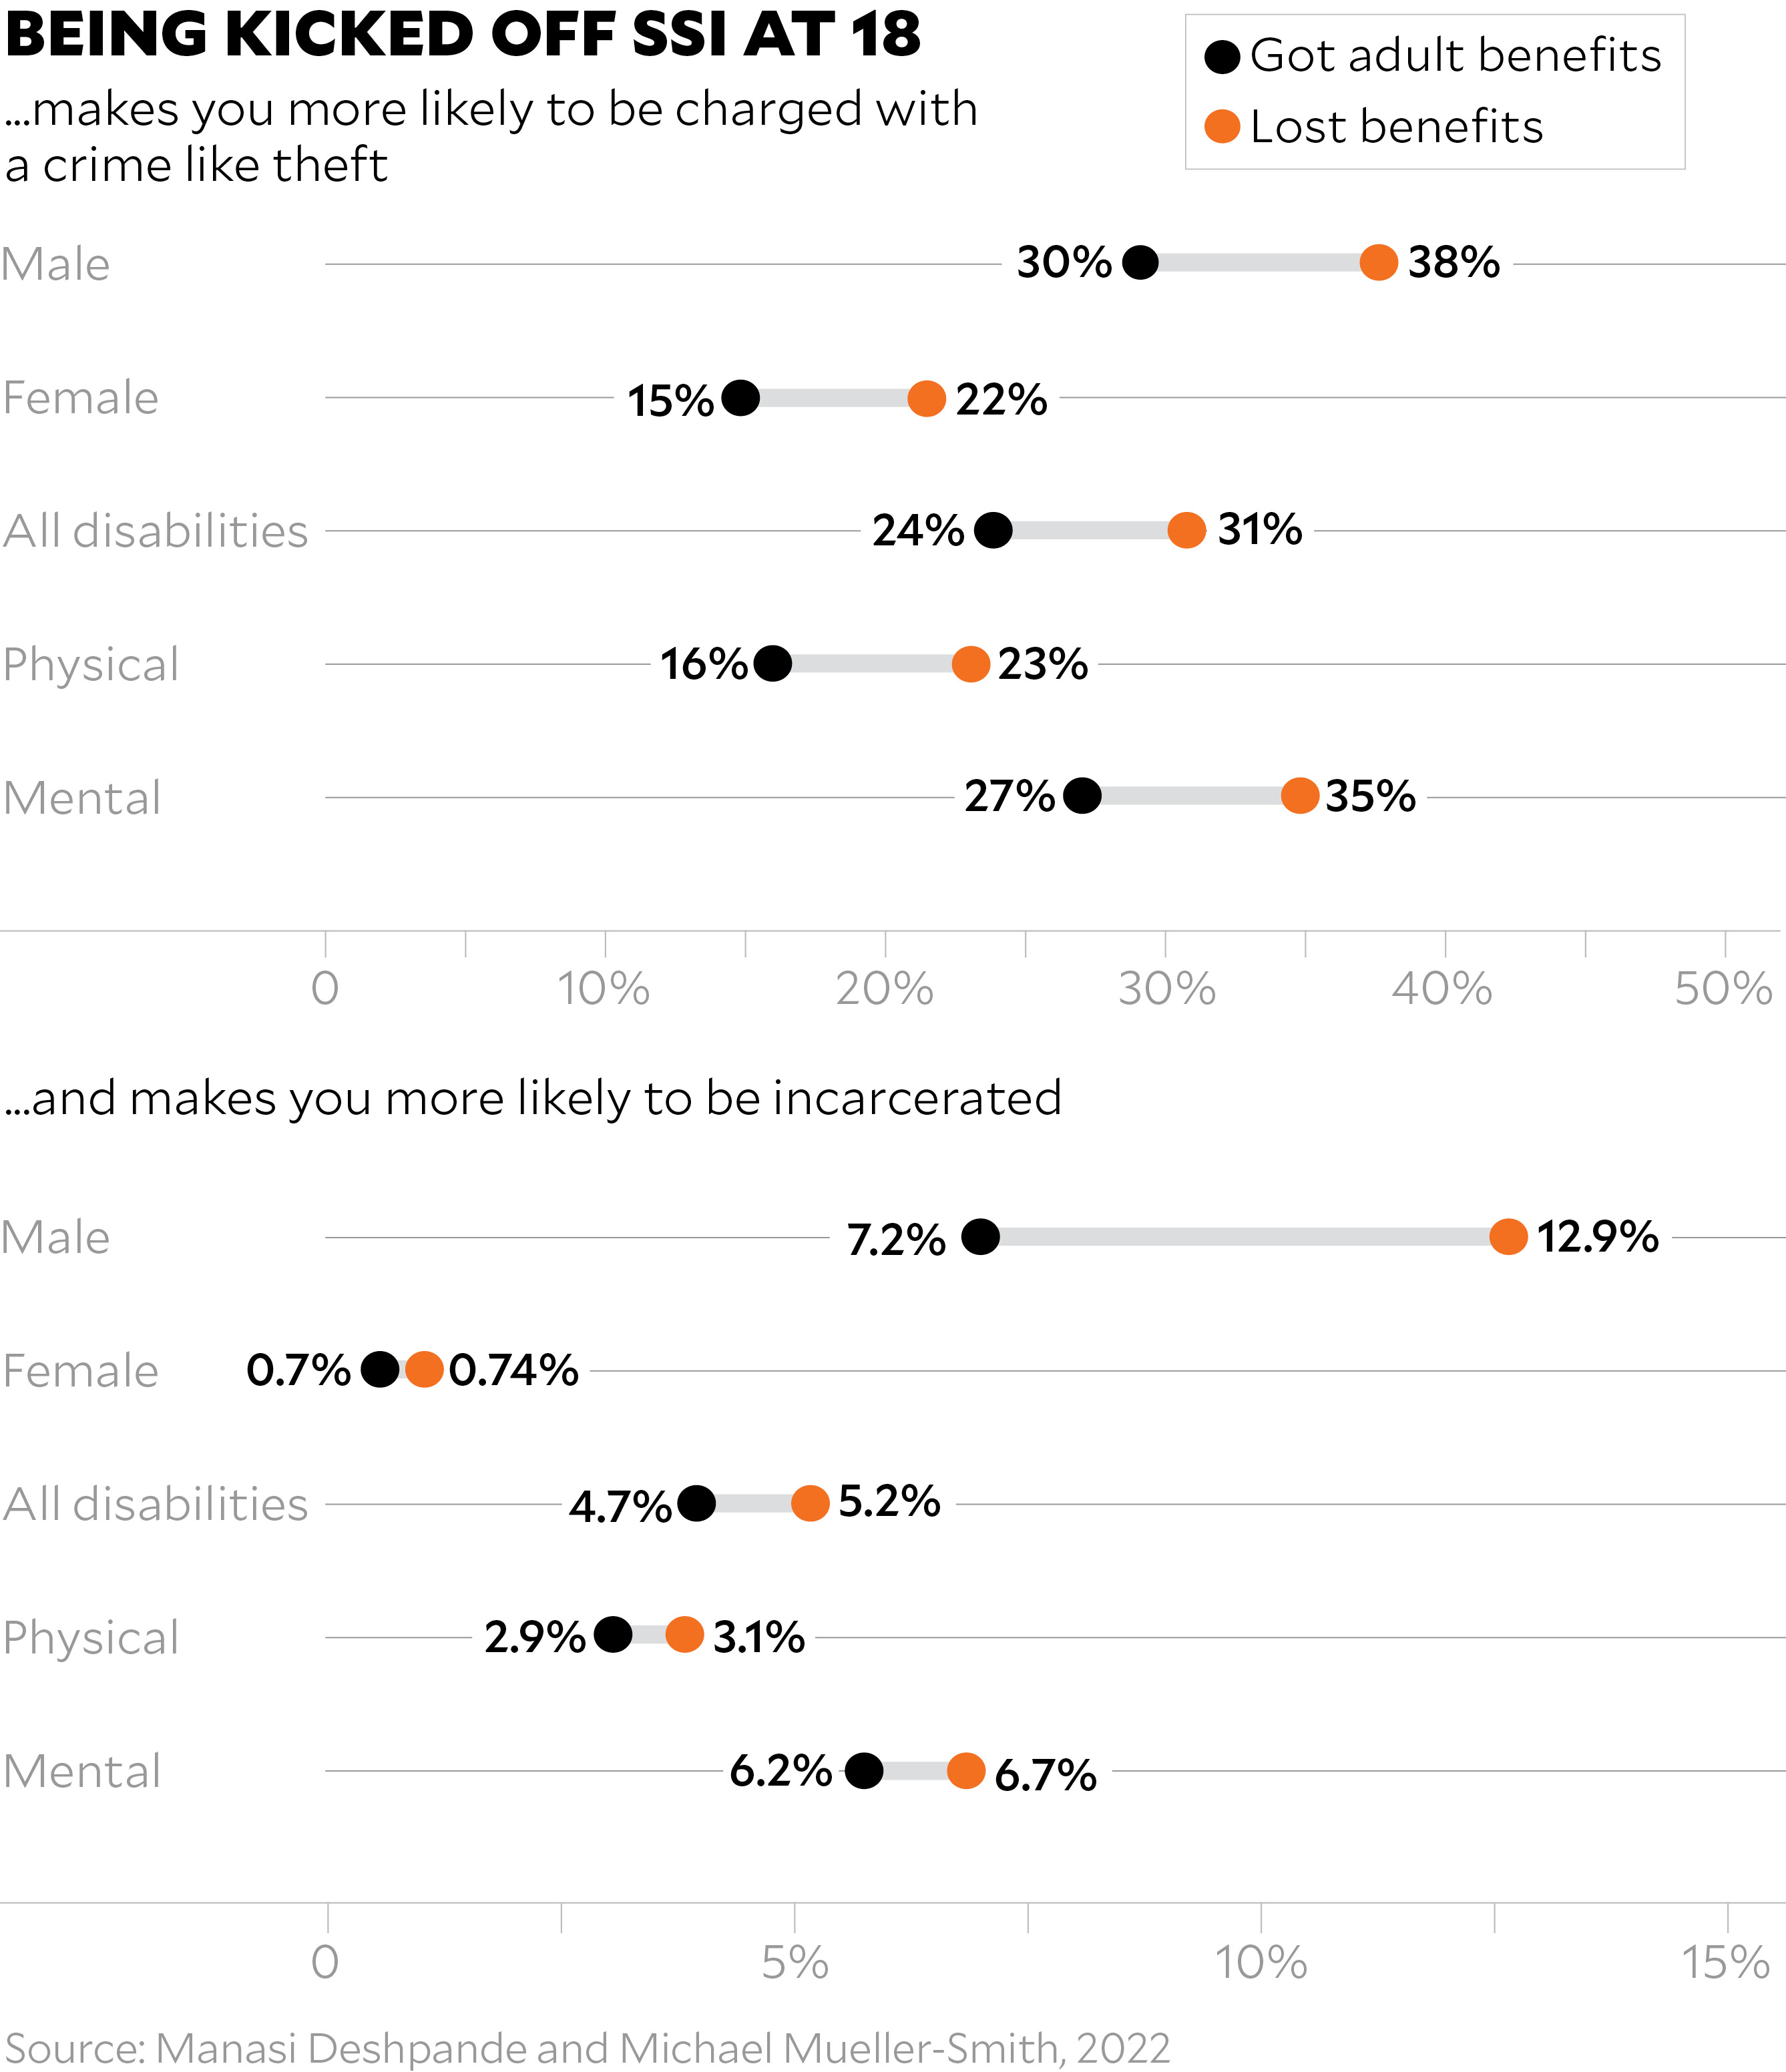 This image has two graphics that show across all categories, people who are kicked off SSI are more likely to be charged with a crime like theft or be incarcerated. Title is 